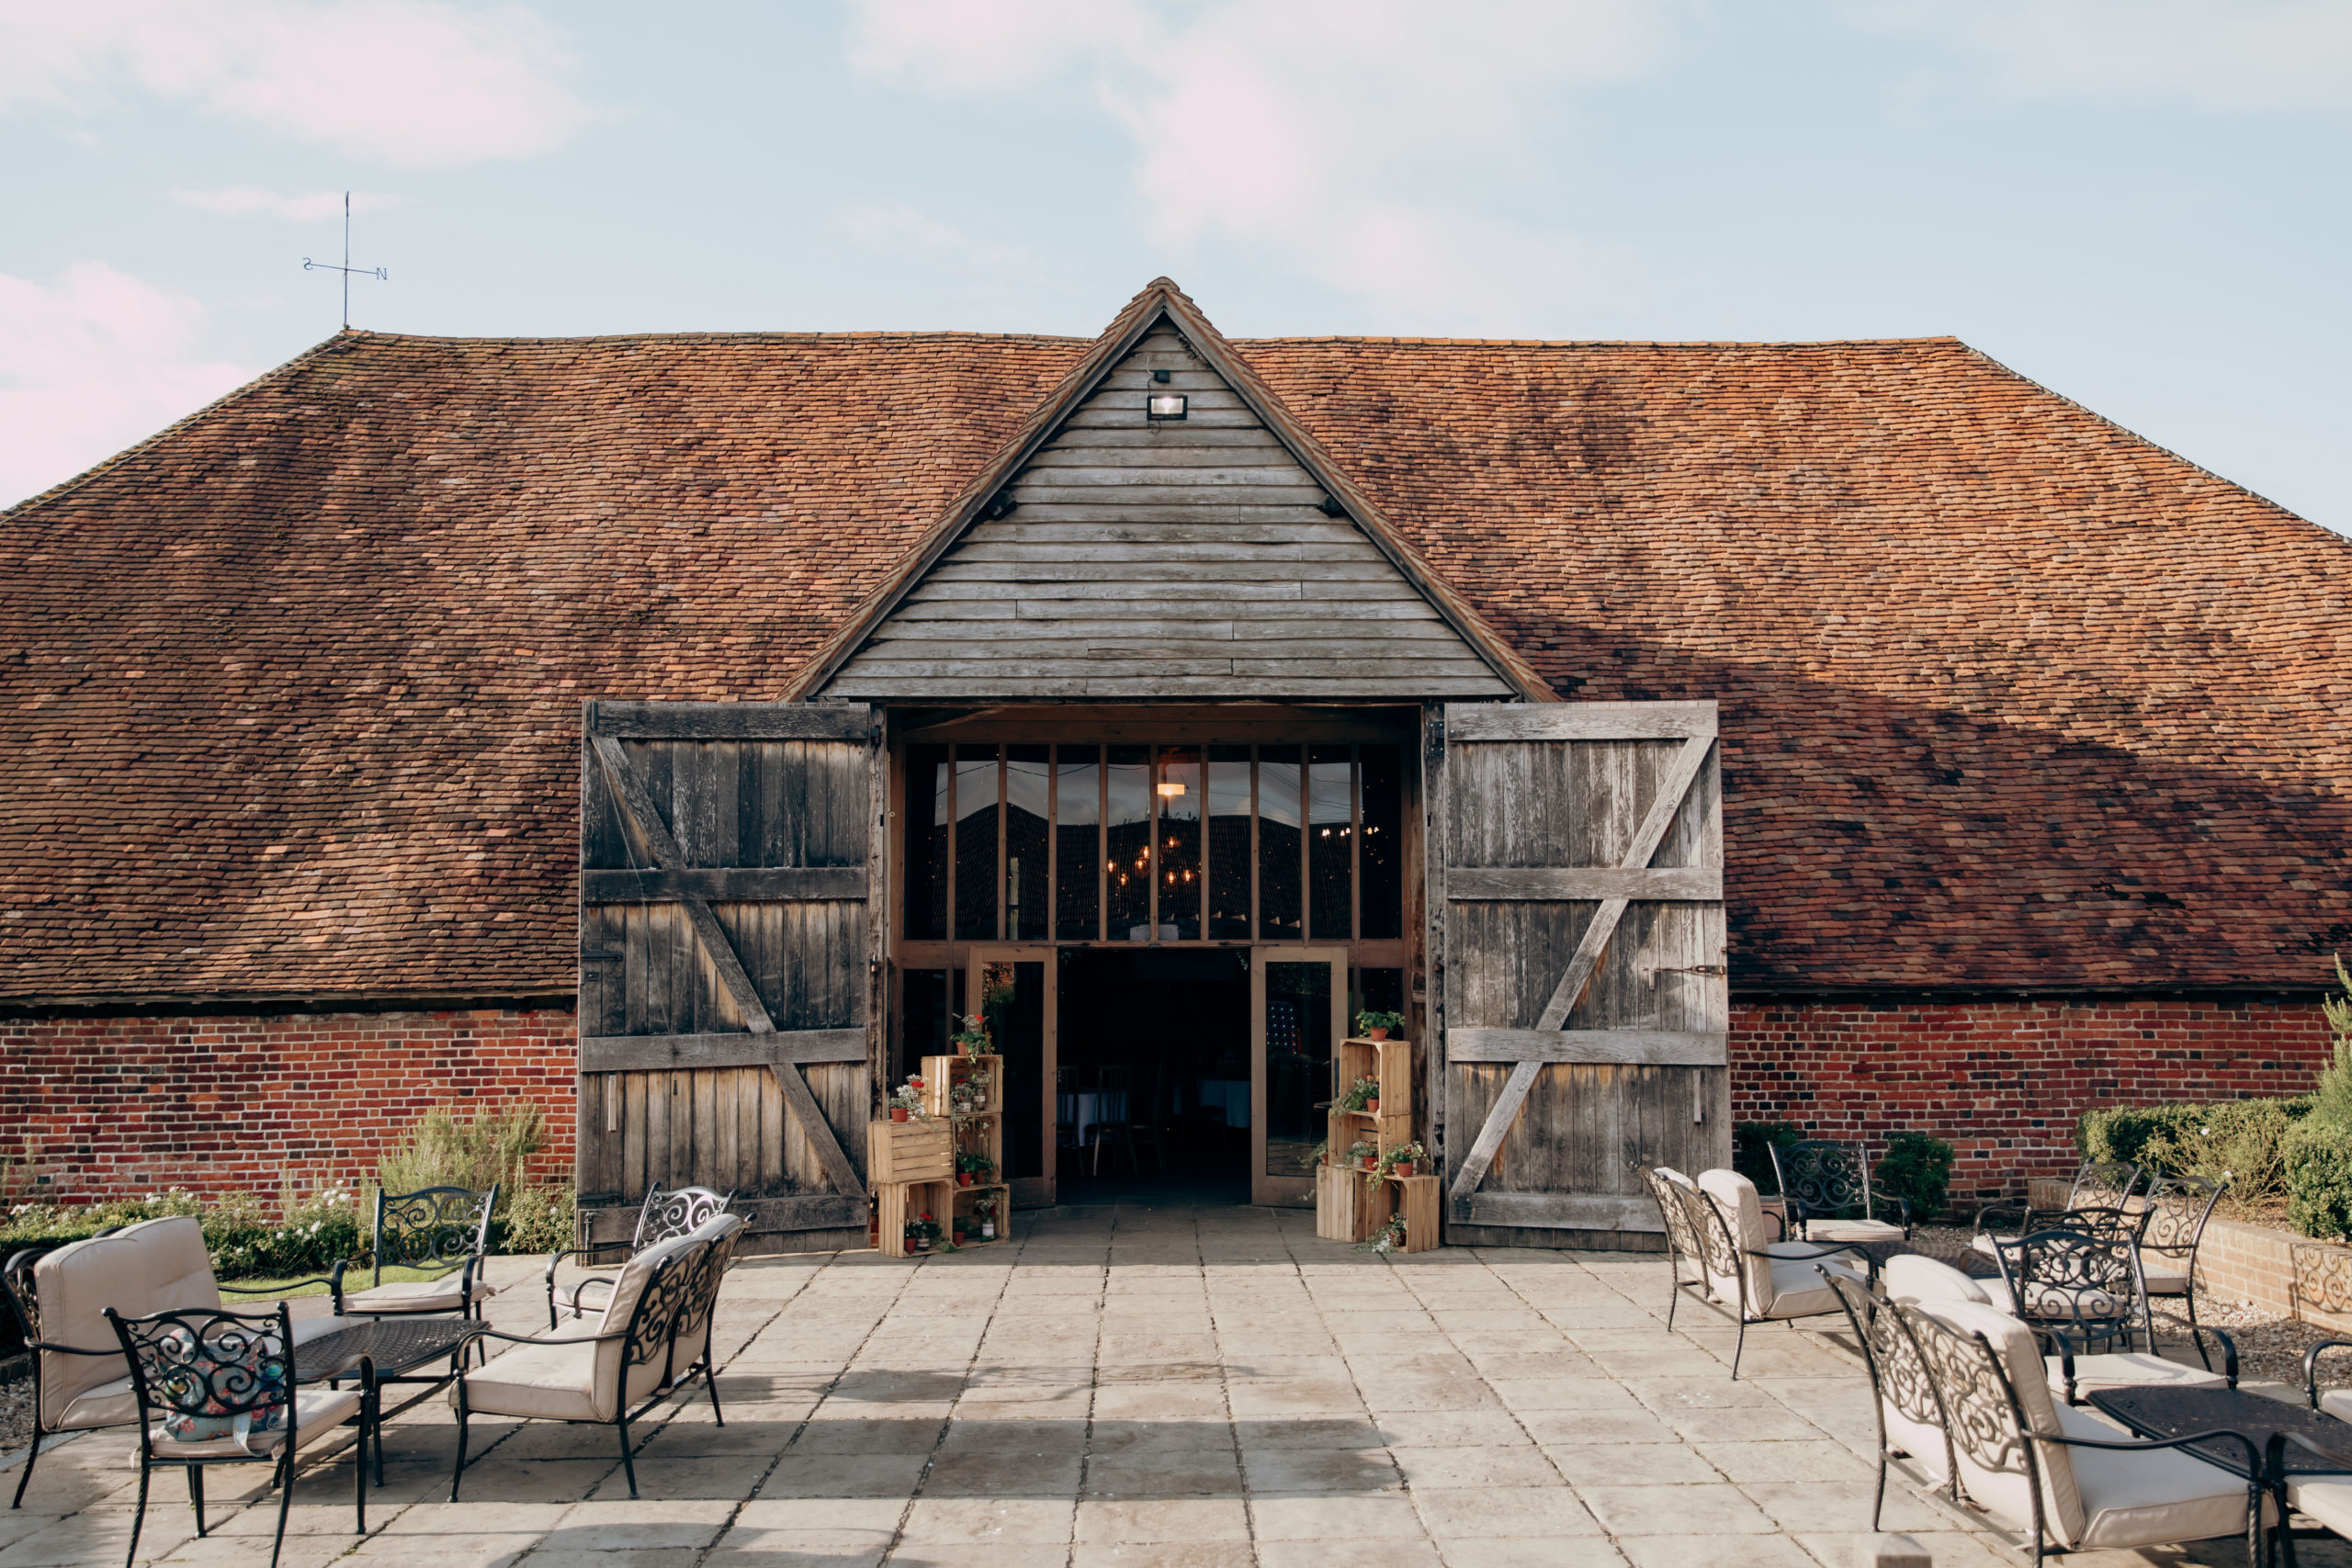 The barn at Ufton Court. Booking your venue is one of the first steps in the wedding planning timeline